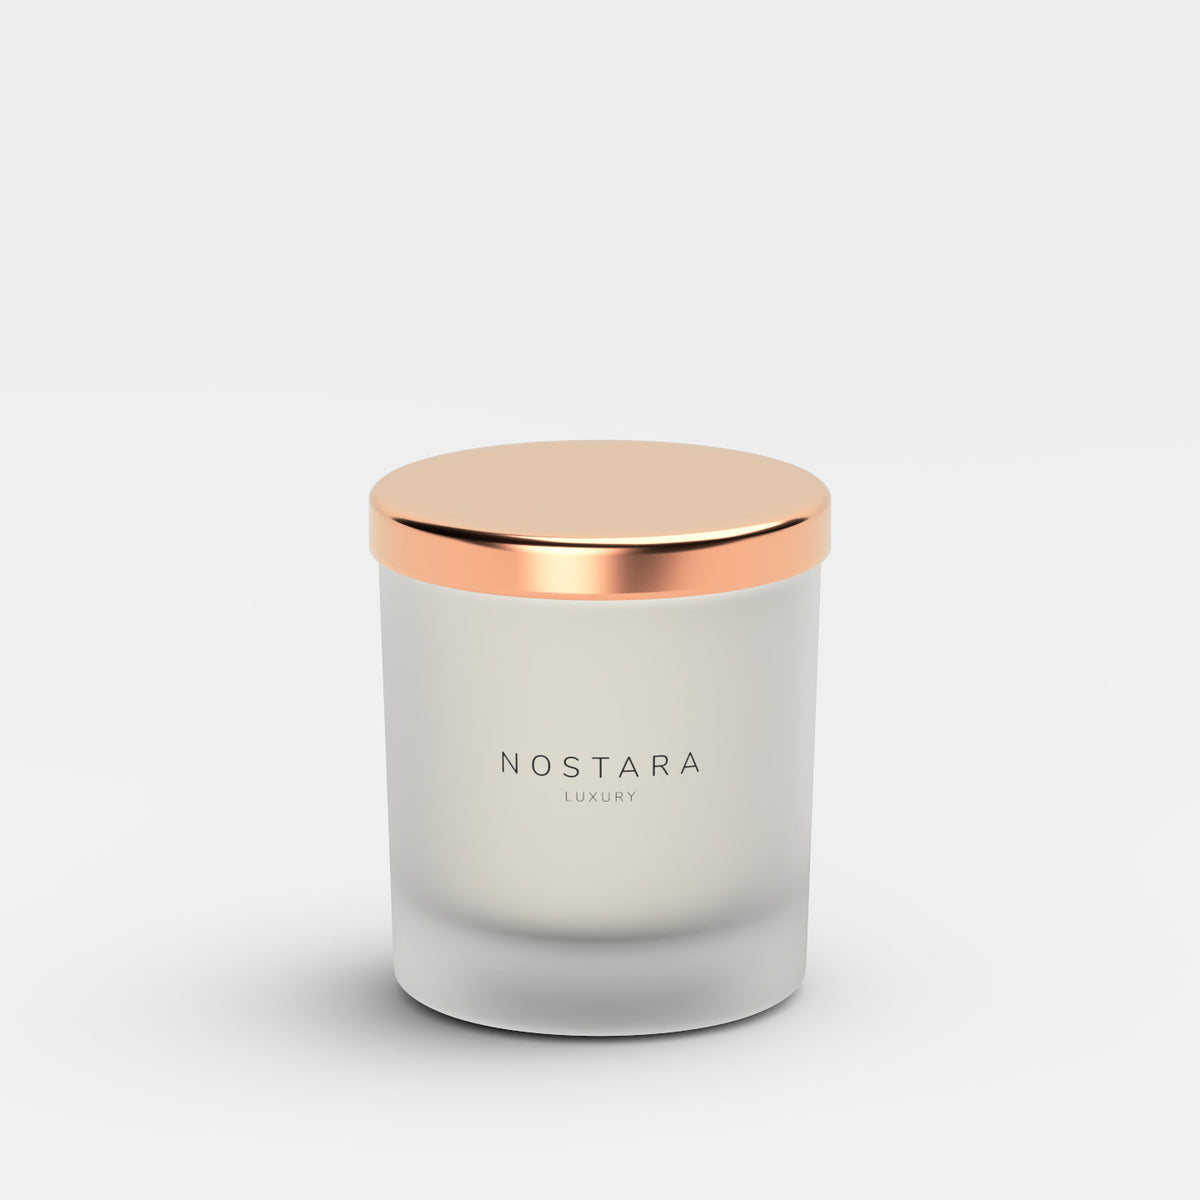 Nostara Burnished Amber Scented Candle with Lid Image 